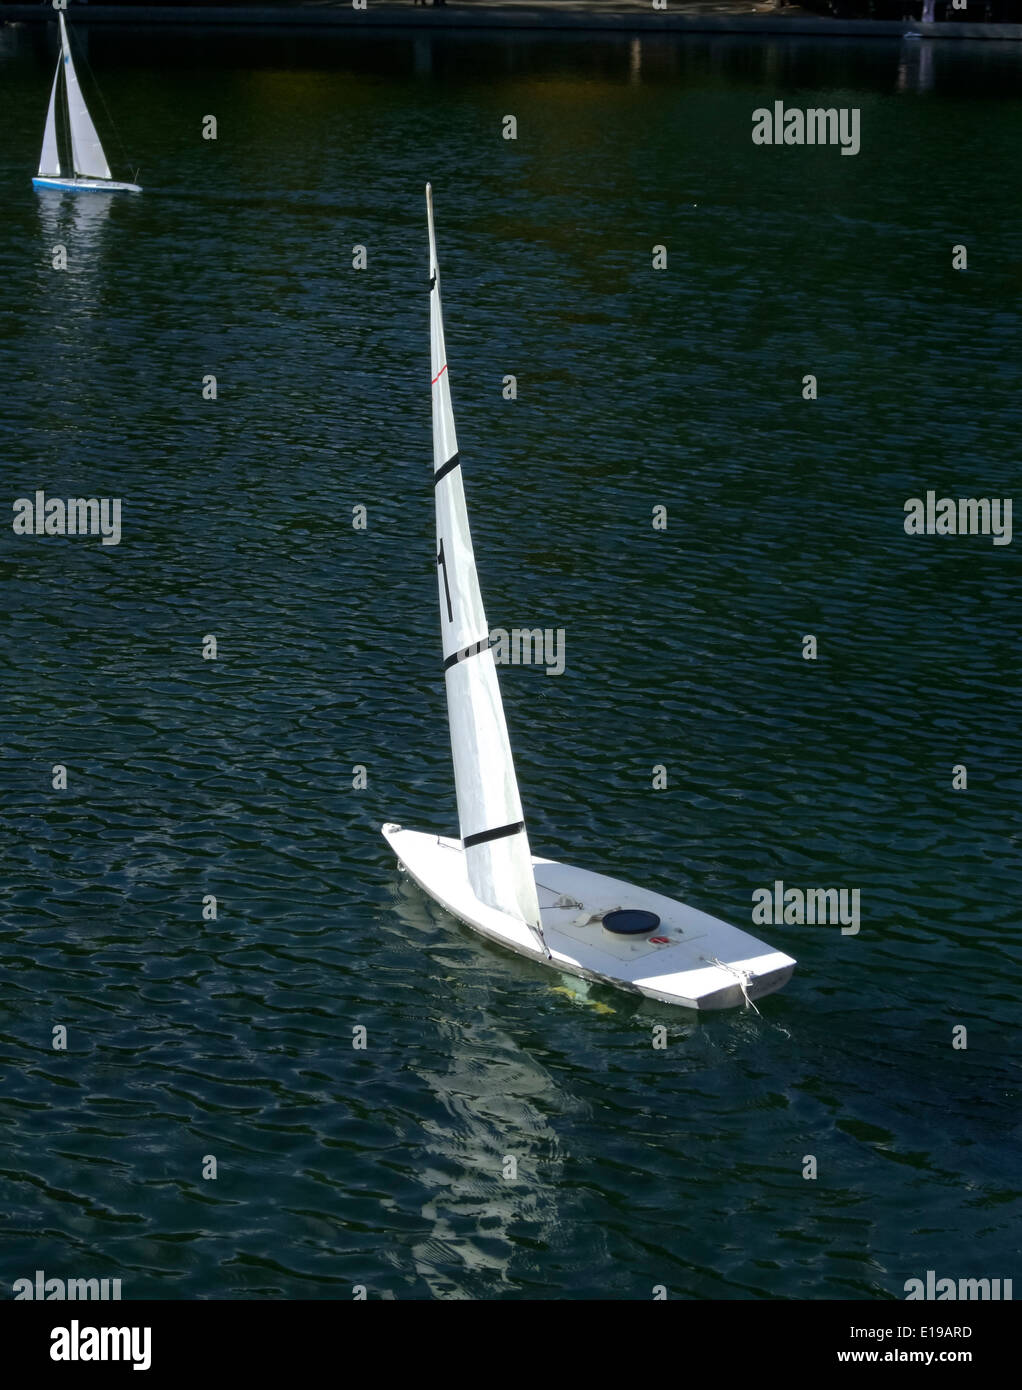 Sailboat moving in a lake Stock Photo